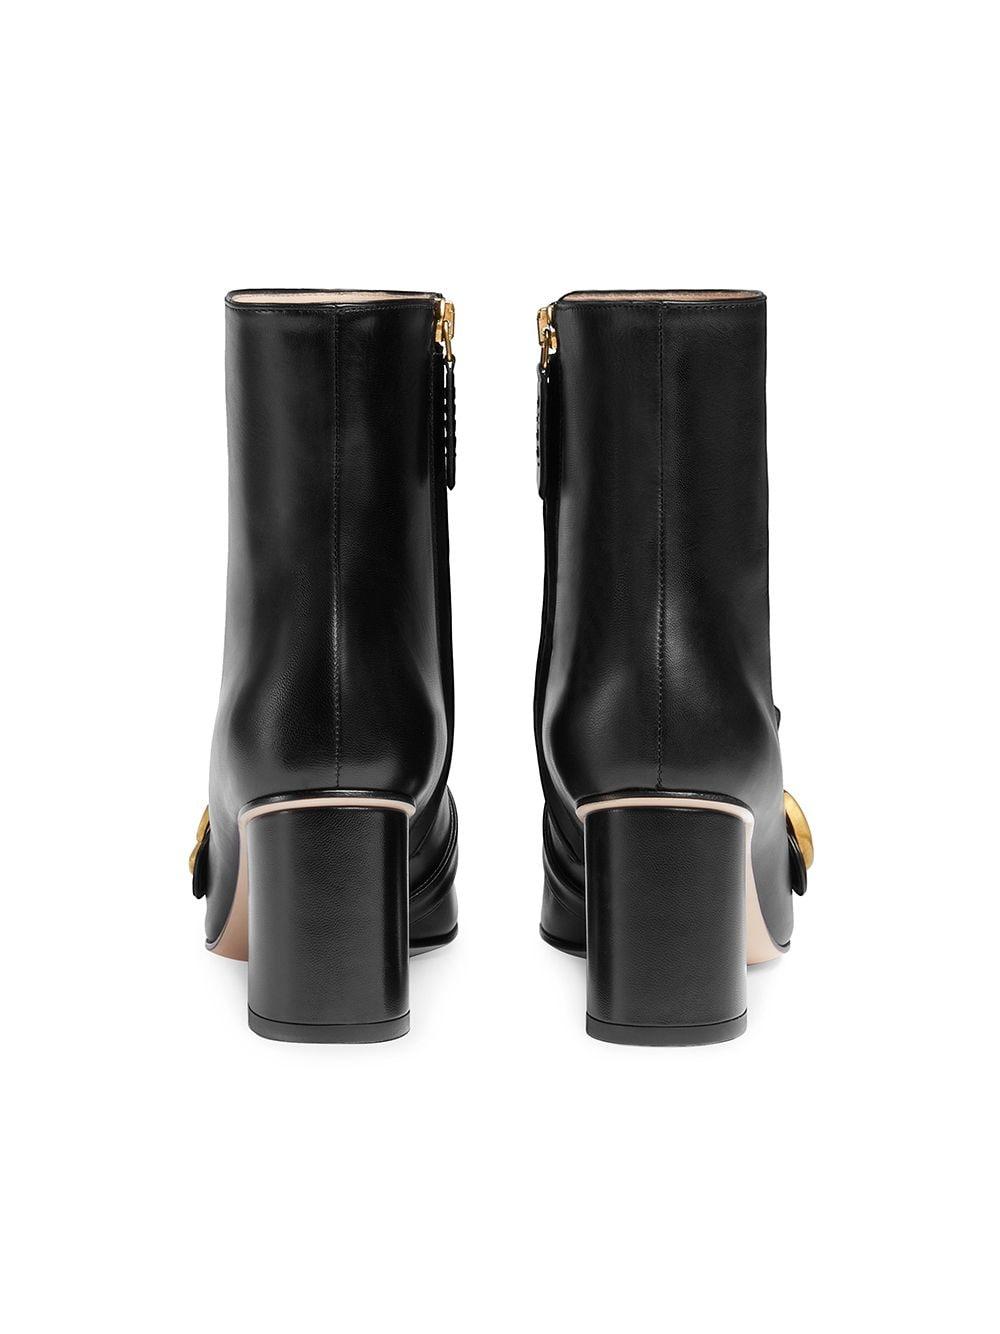 Gucci Marmont GG Suede Ankle Boots in Black Leather (Black) | Lyst